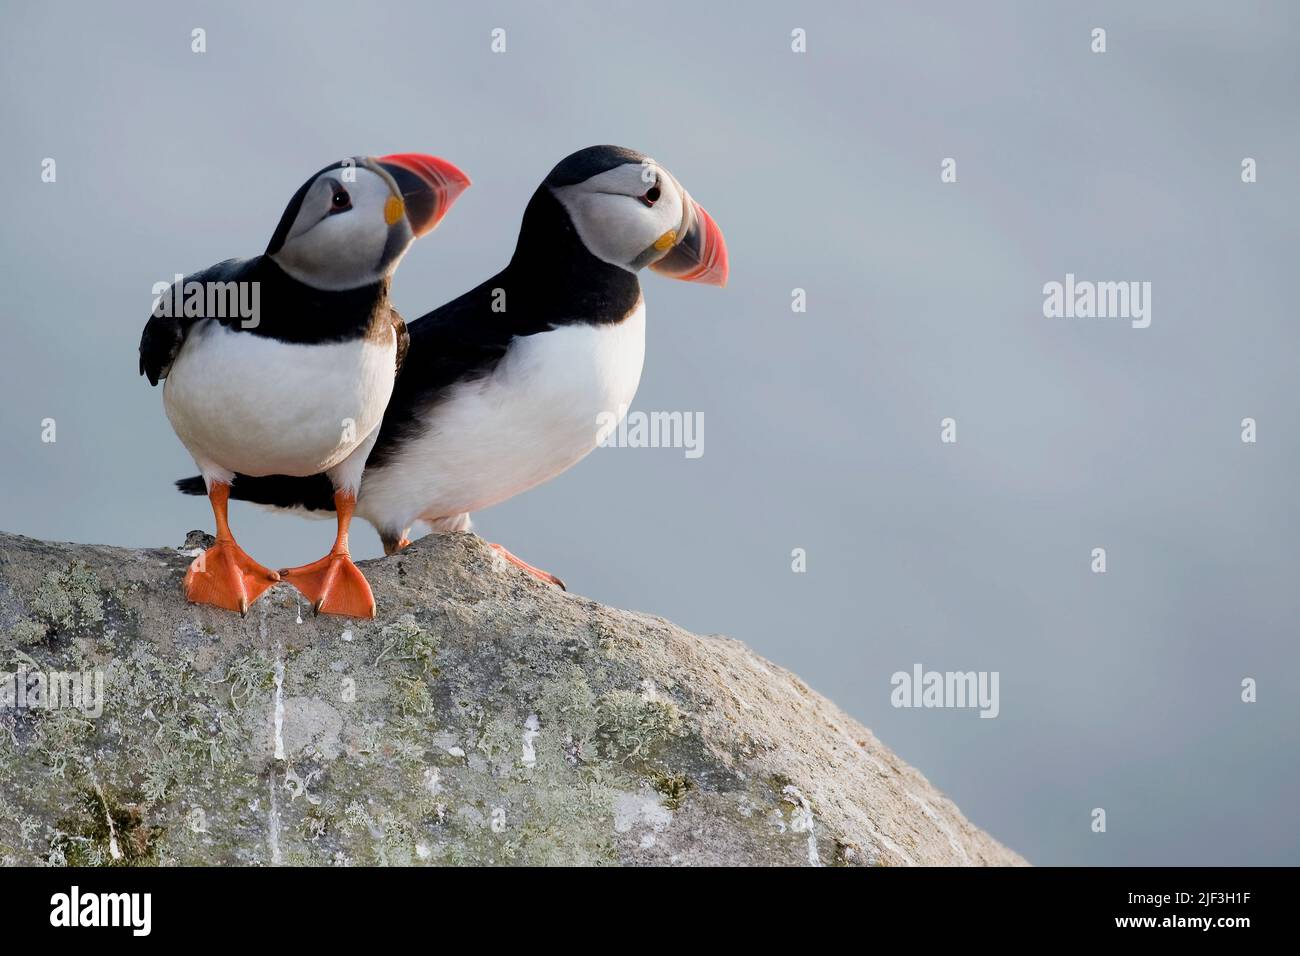 Atlantic Puffin, Fratercula arctica, from the island of Runde, north-western Norway. Stock Photo